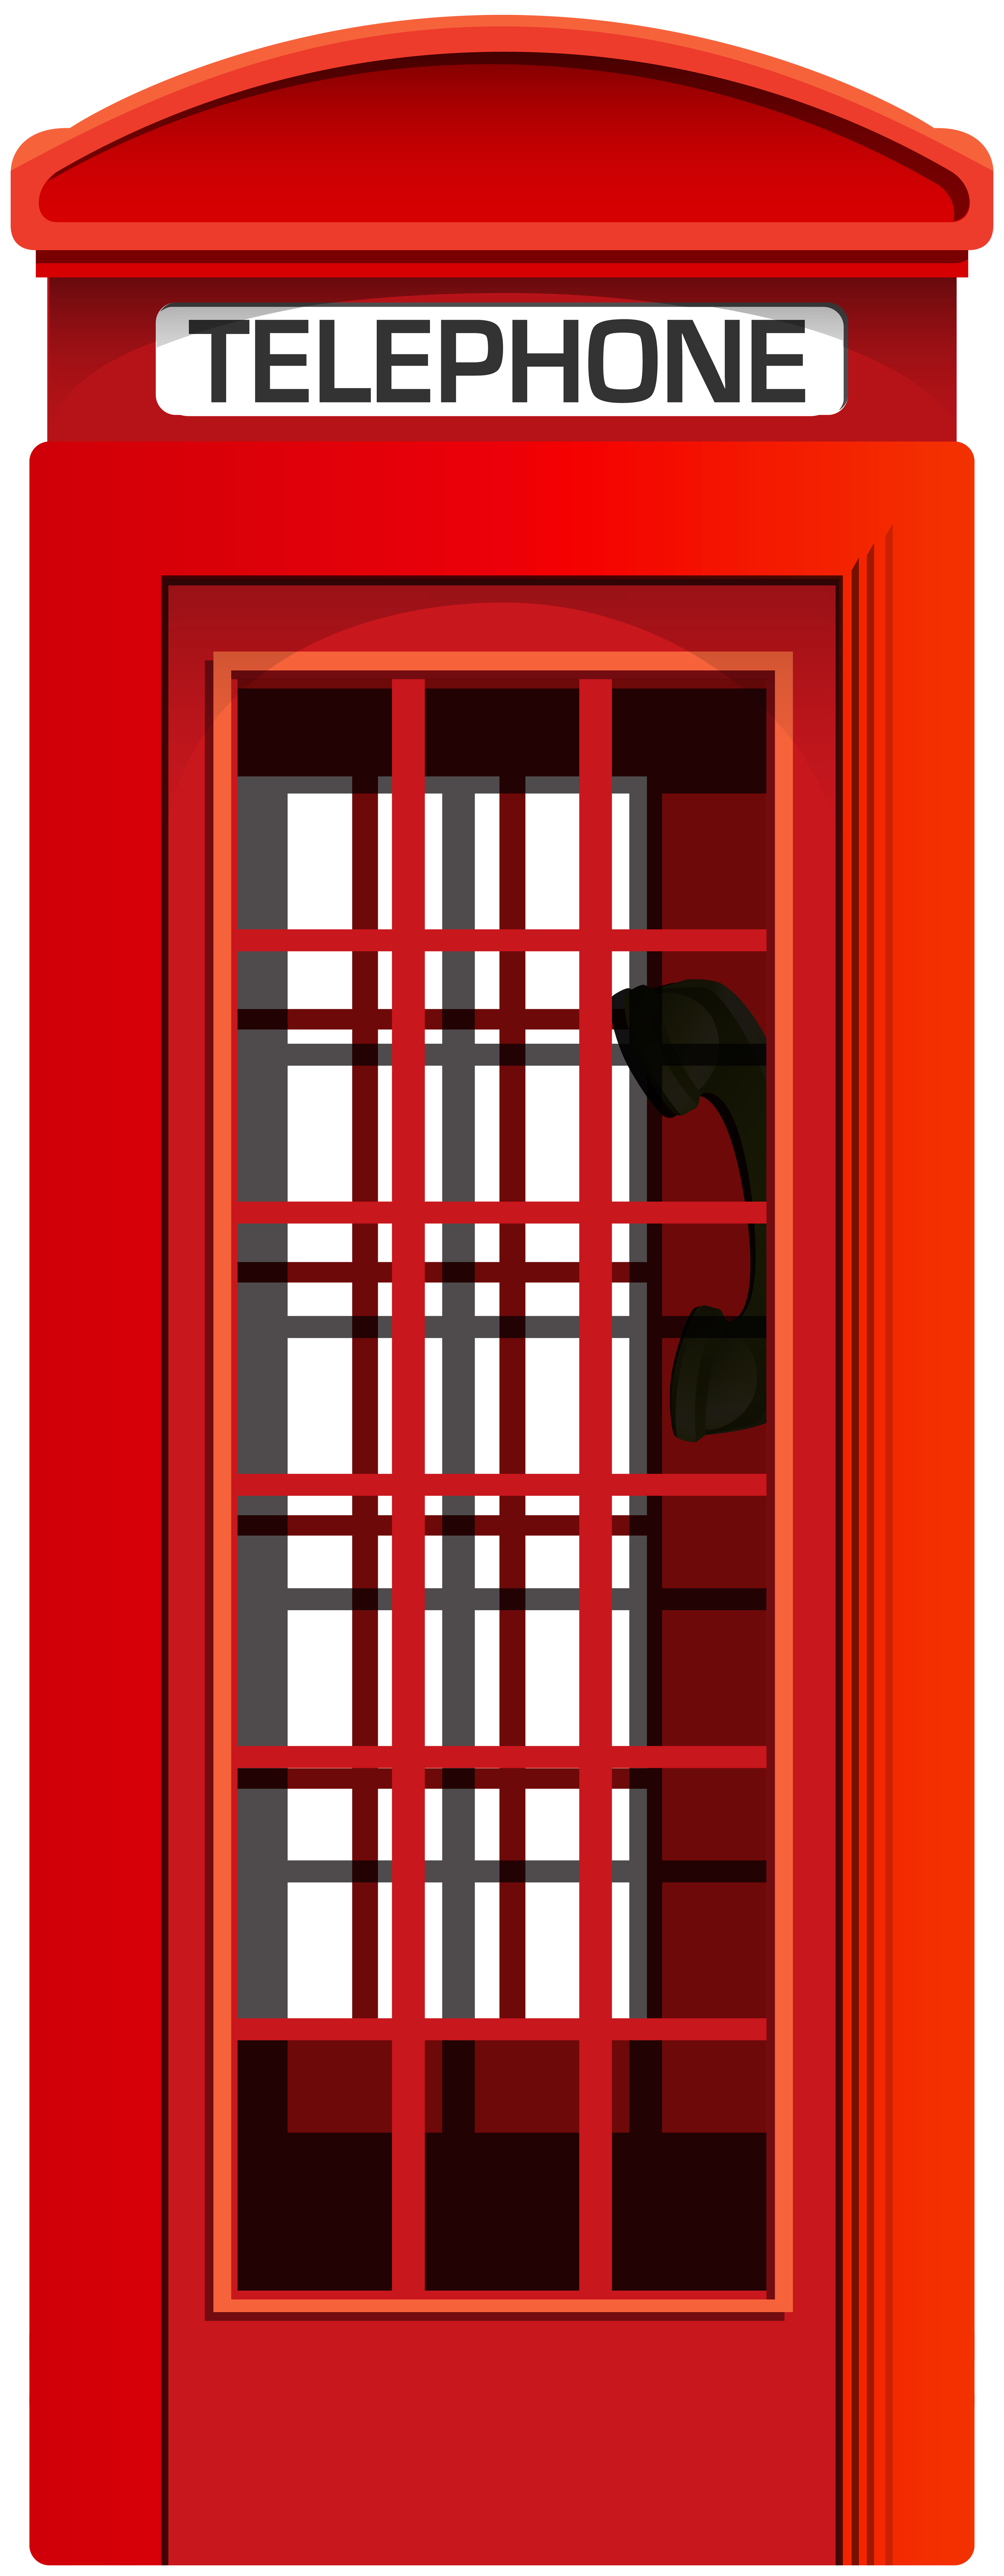 telephone clipart red telephone